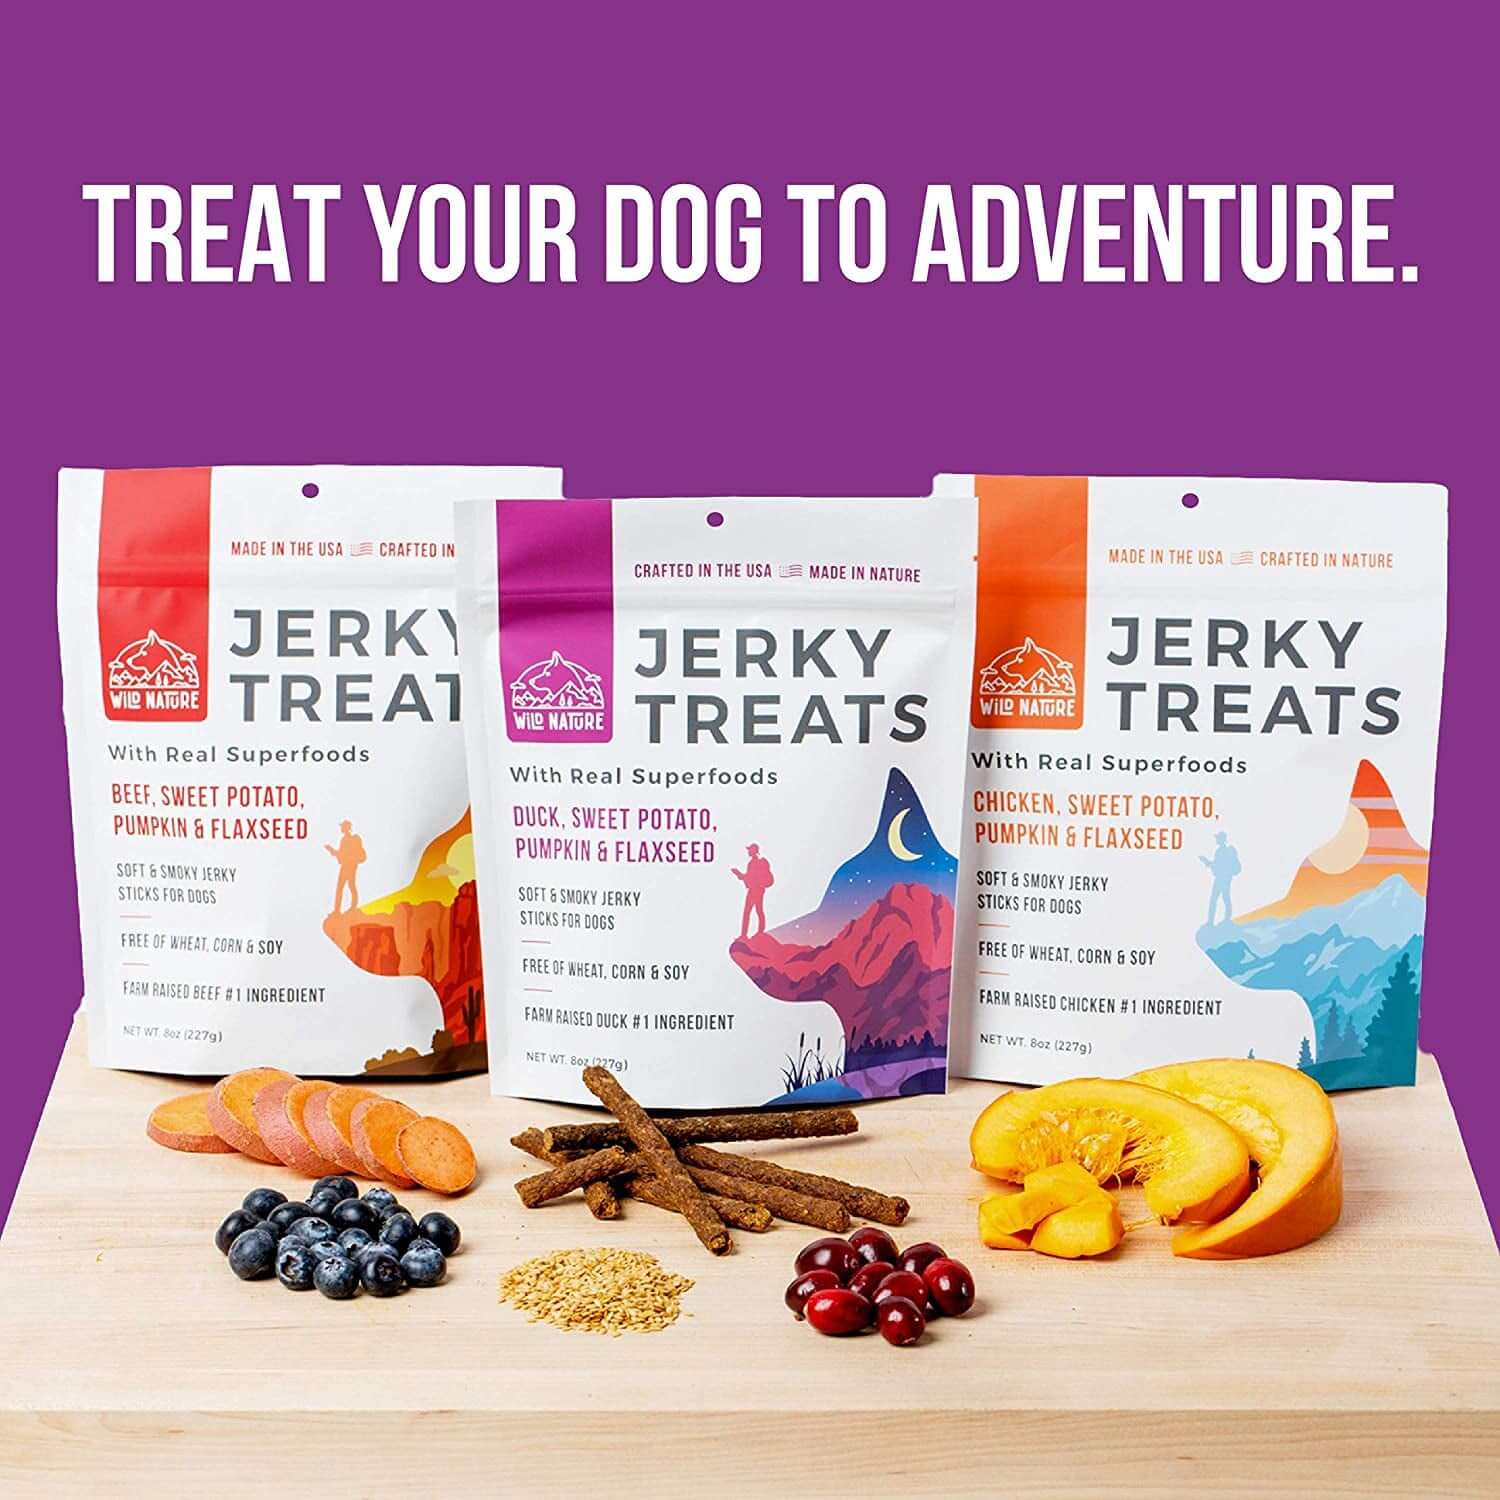 Jerky Dog Treats - Premium Beef, Chicken, & Duck Jerky Sticks for Dogs Variety Packs - Healthy and Natural Jerky Treats Grain Free Made in the USA